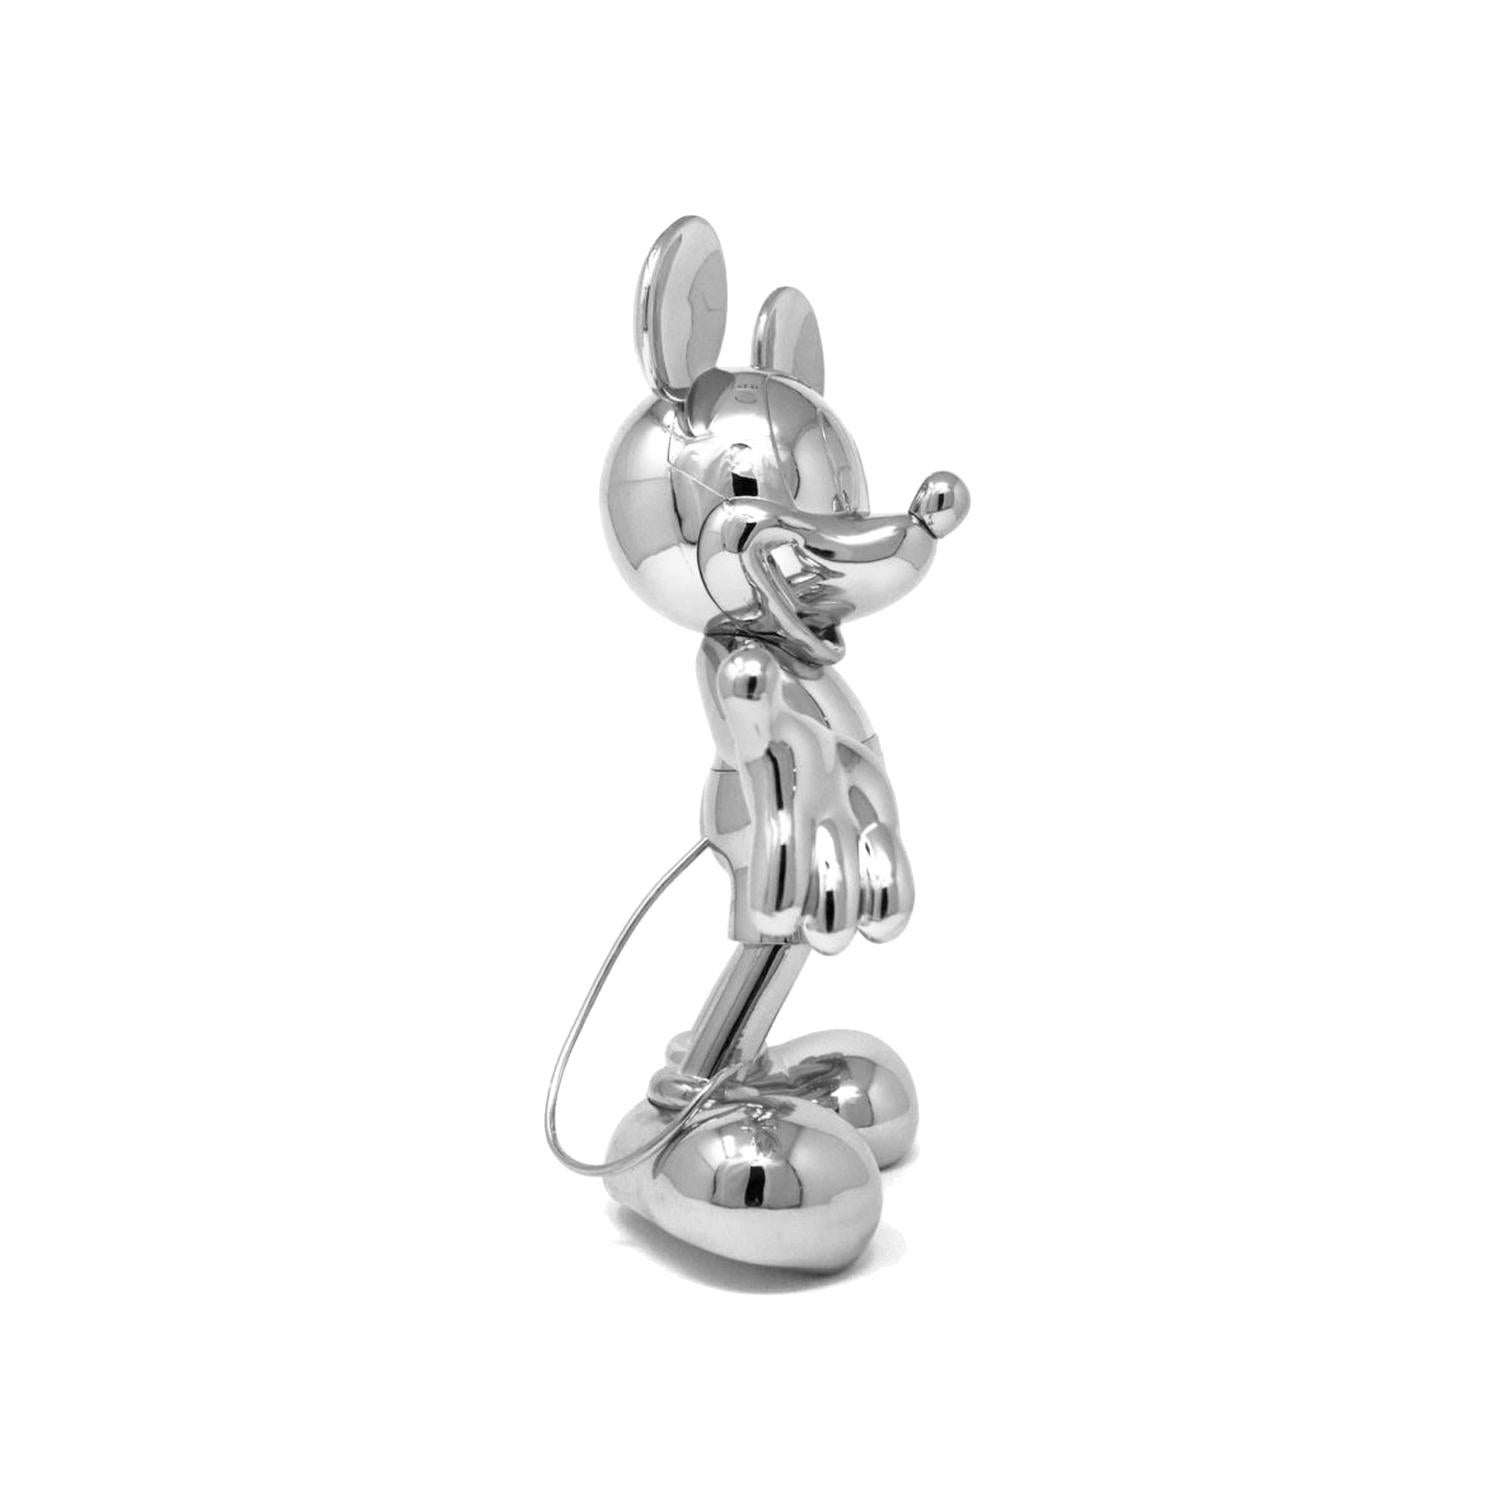 French Mickey Mouse Metallic Chrome Silver, Pop Figurine